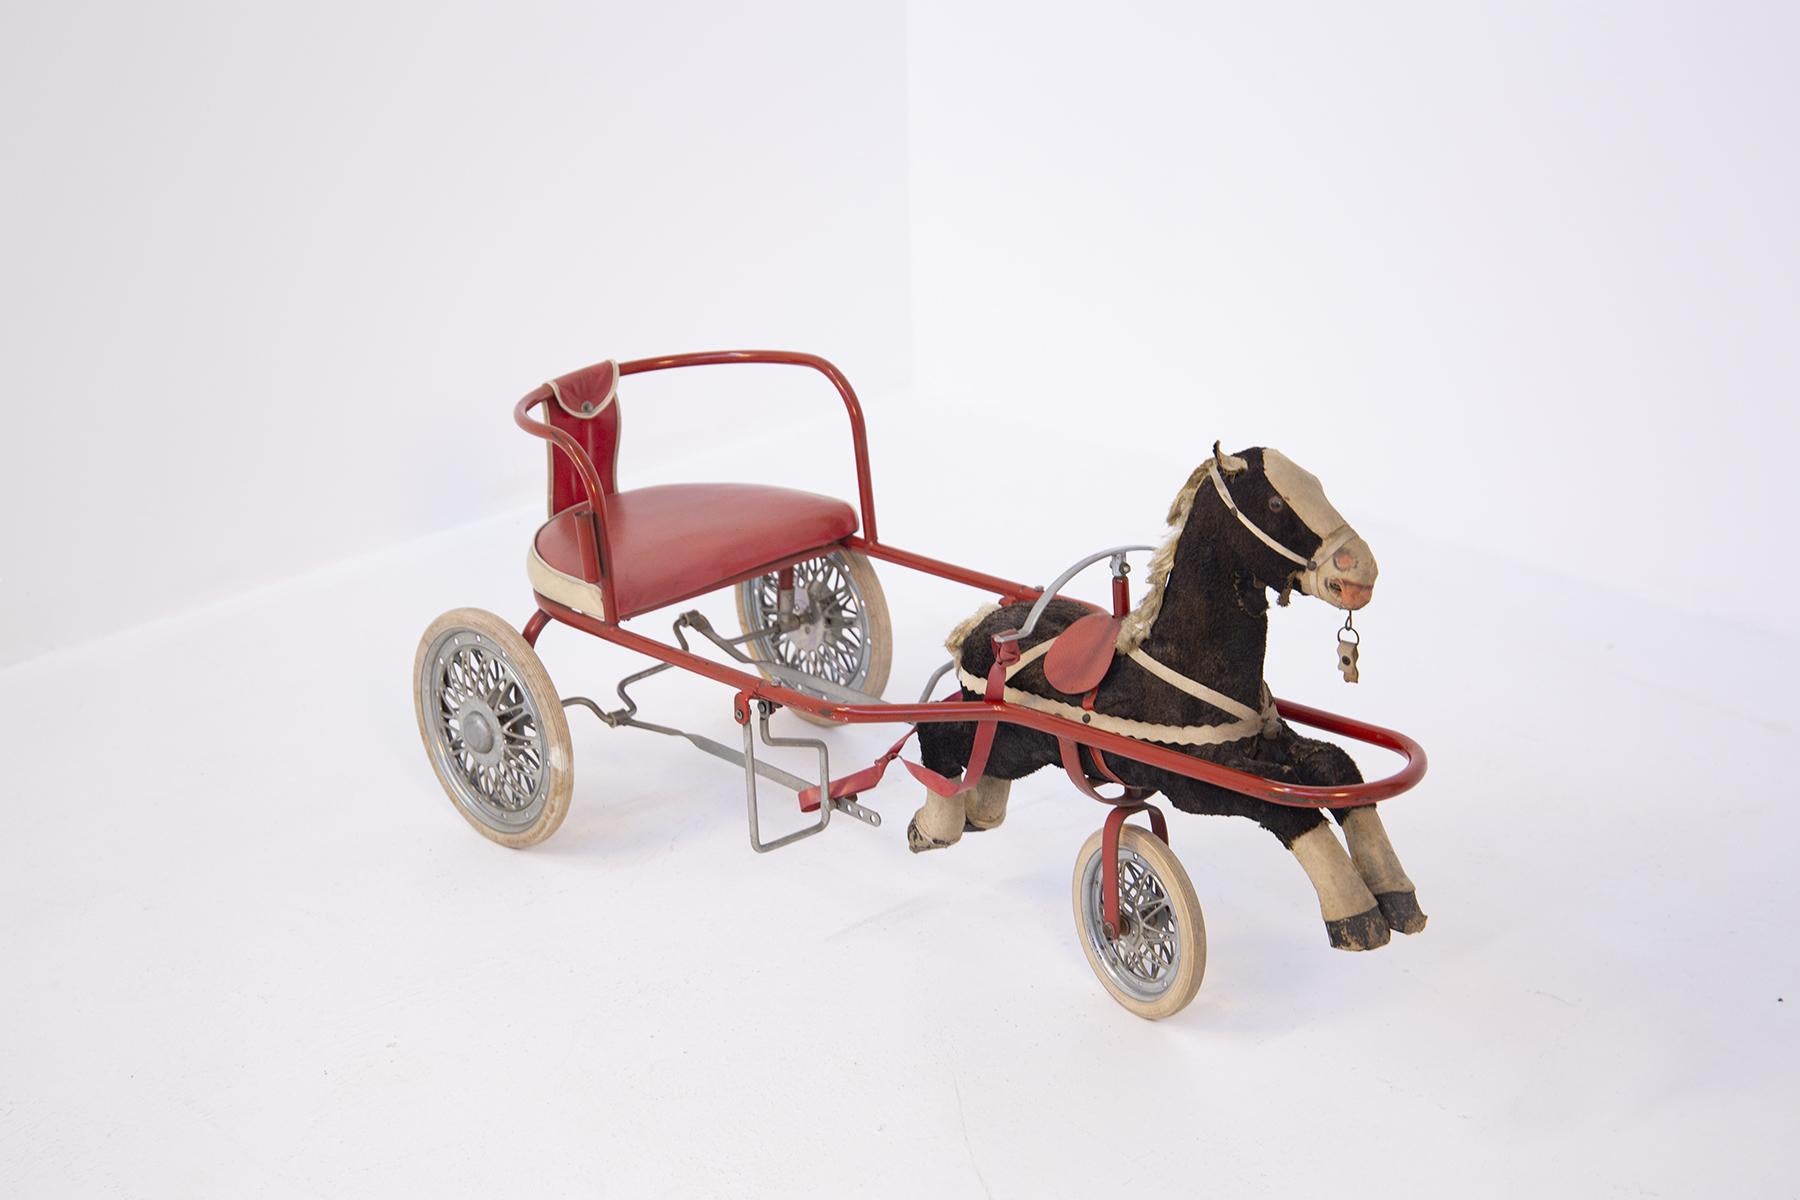 Nice vintage Italian toy of the 50's for girl, of Italian manufacture. The toy is a pretty carriage with its horse attached for little girl, the carriage still has working its pedals that allow the movement of the carriage to a single seat. The care